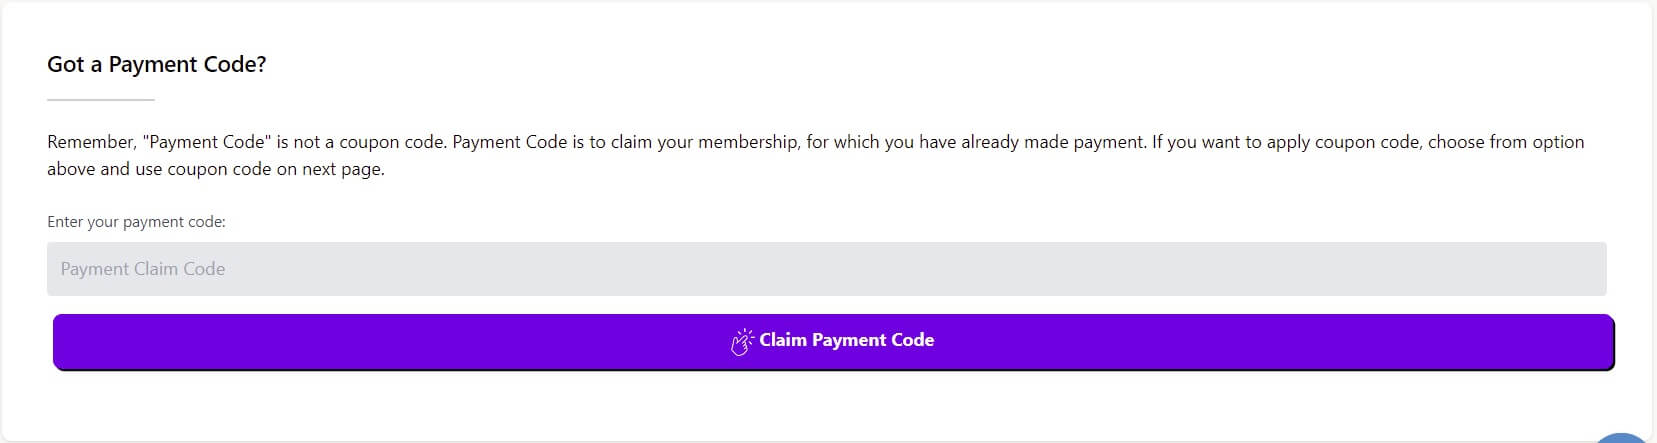 Claim Payment Code